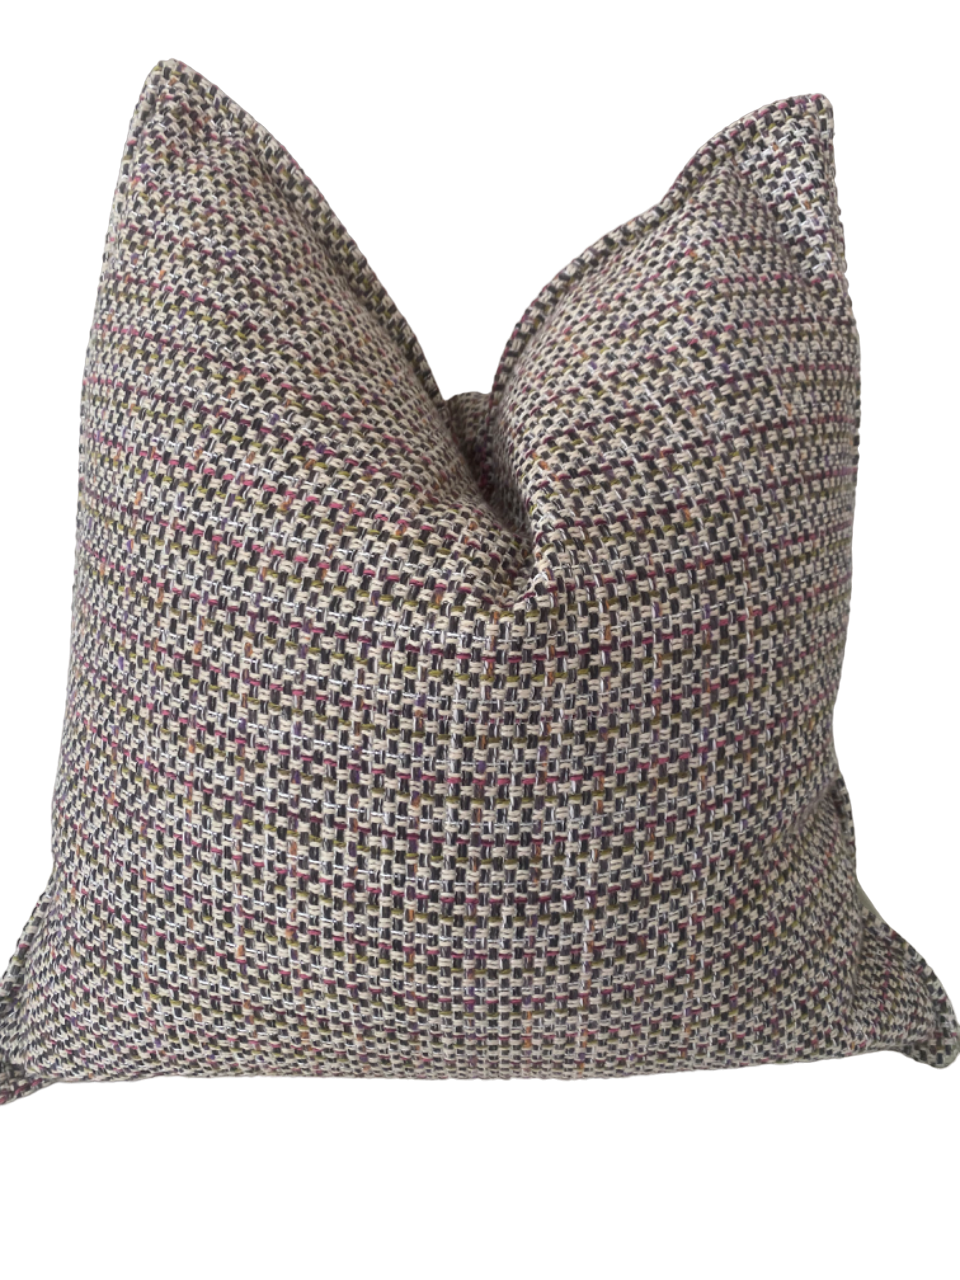 tweed fabric scatter cushion sized 60x60